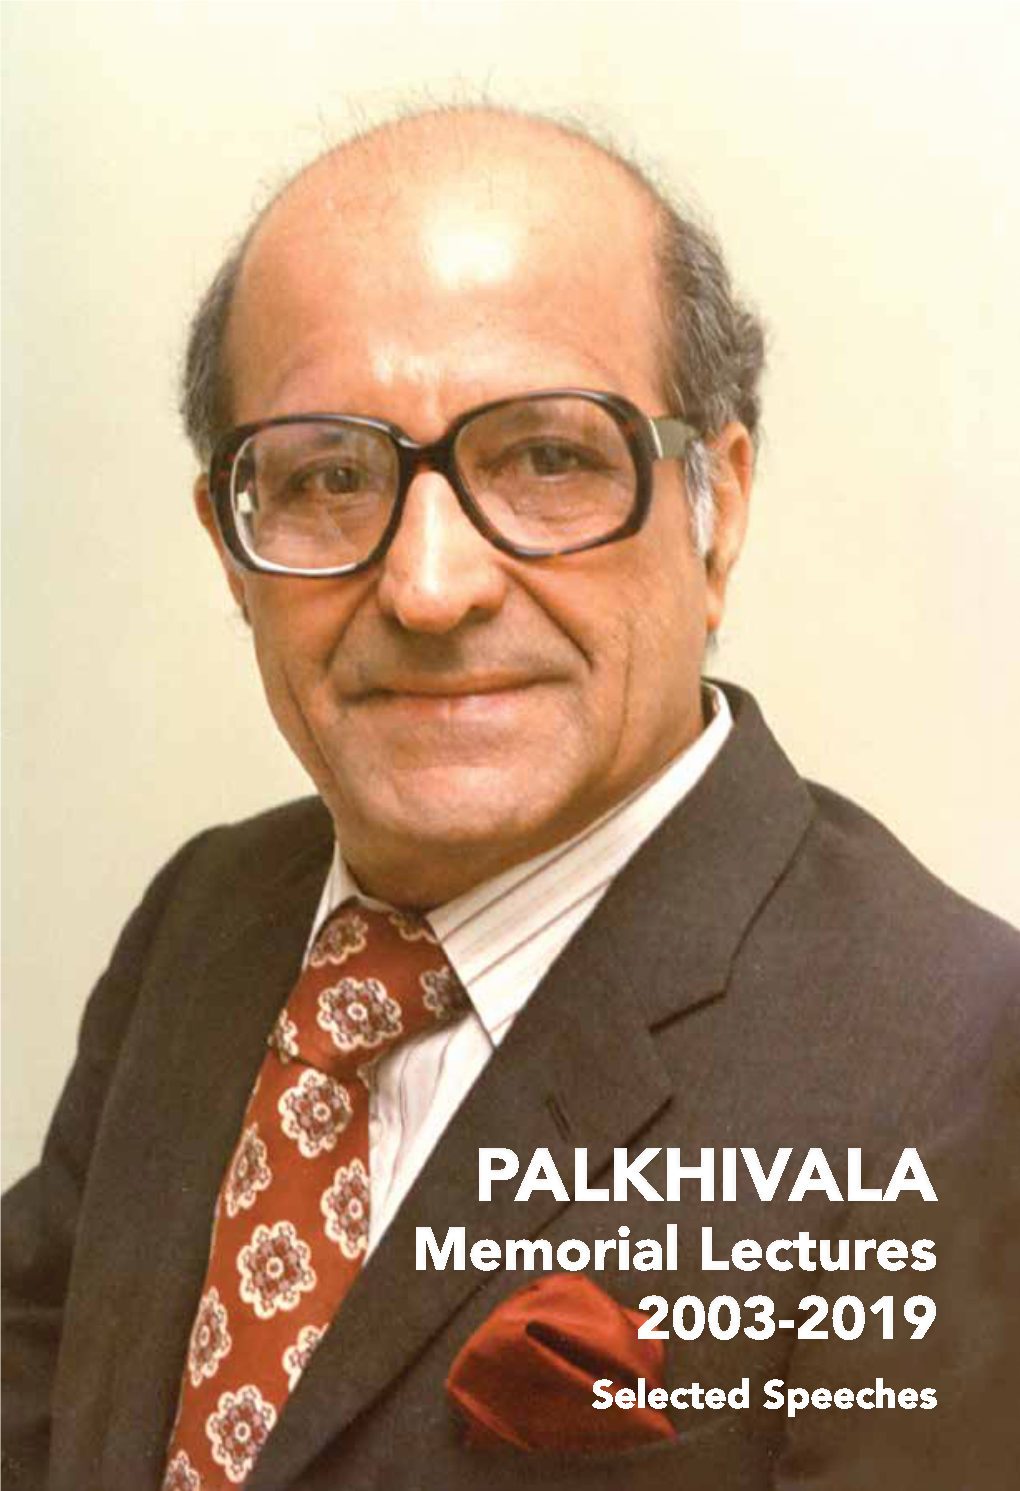 Palkhivala Memorial Lectures 2003-2019 Selected Speeches